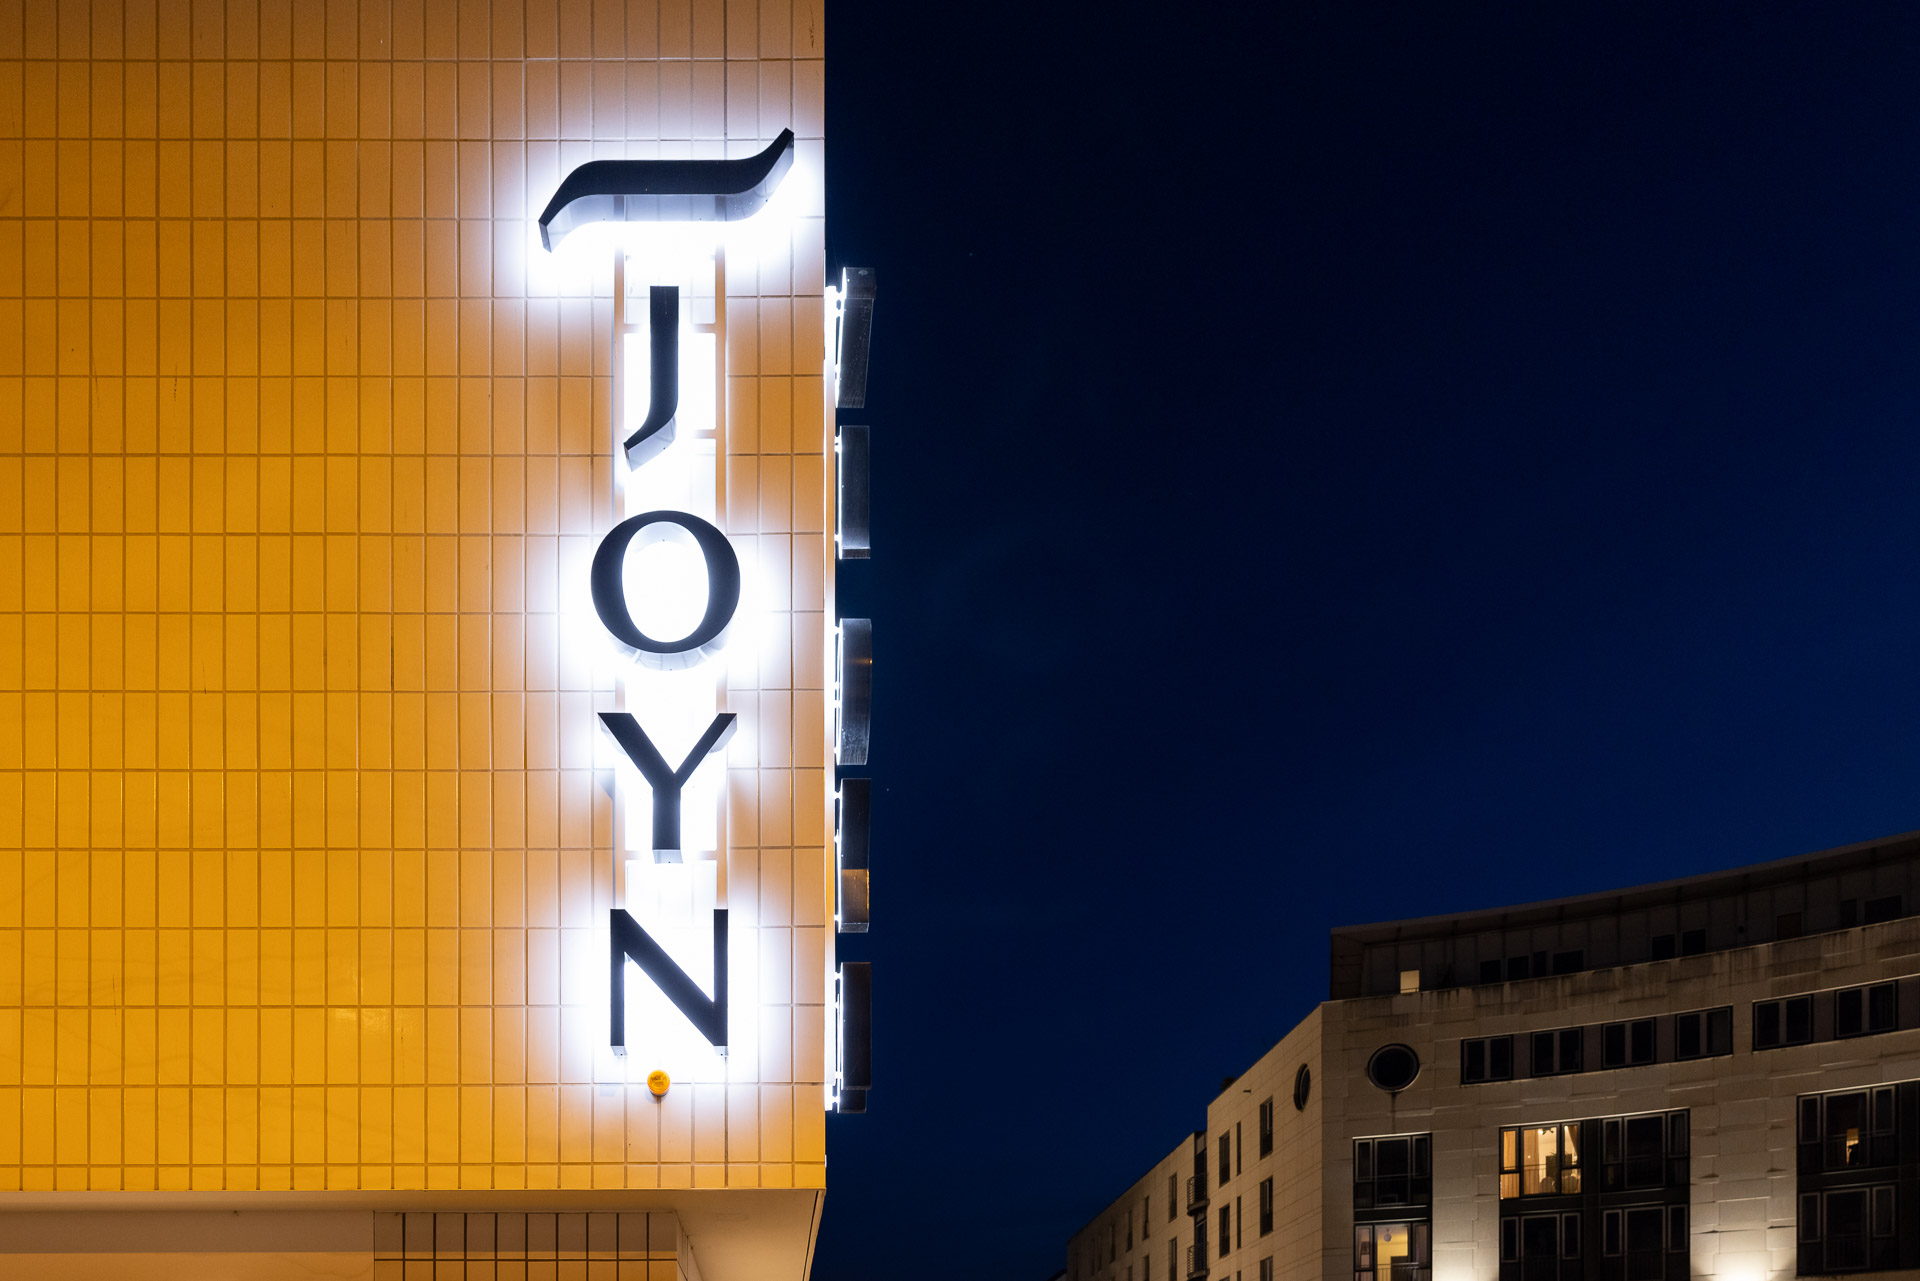 Exterior shot at night of the JOYN Cologne building